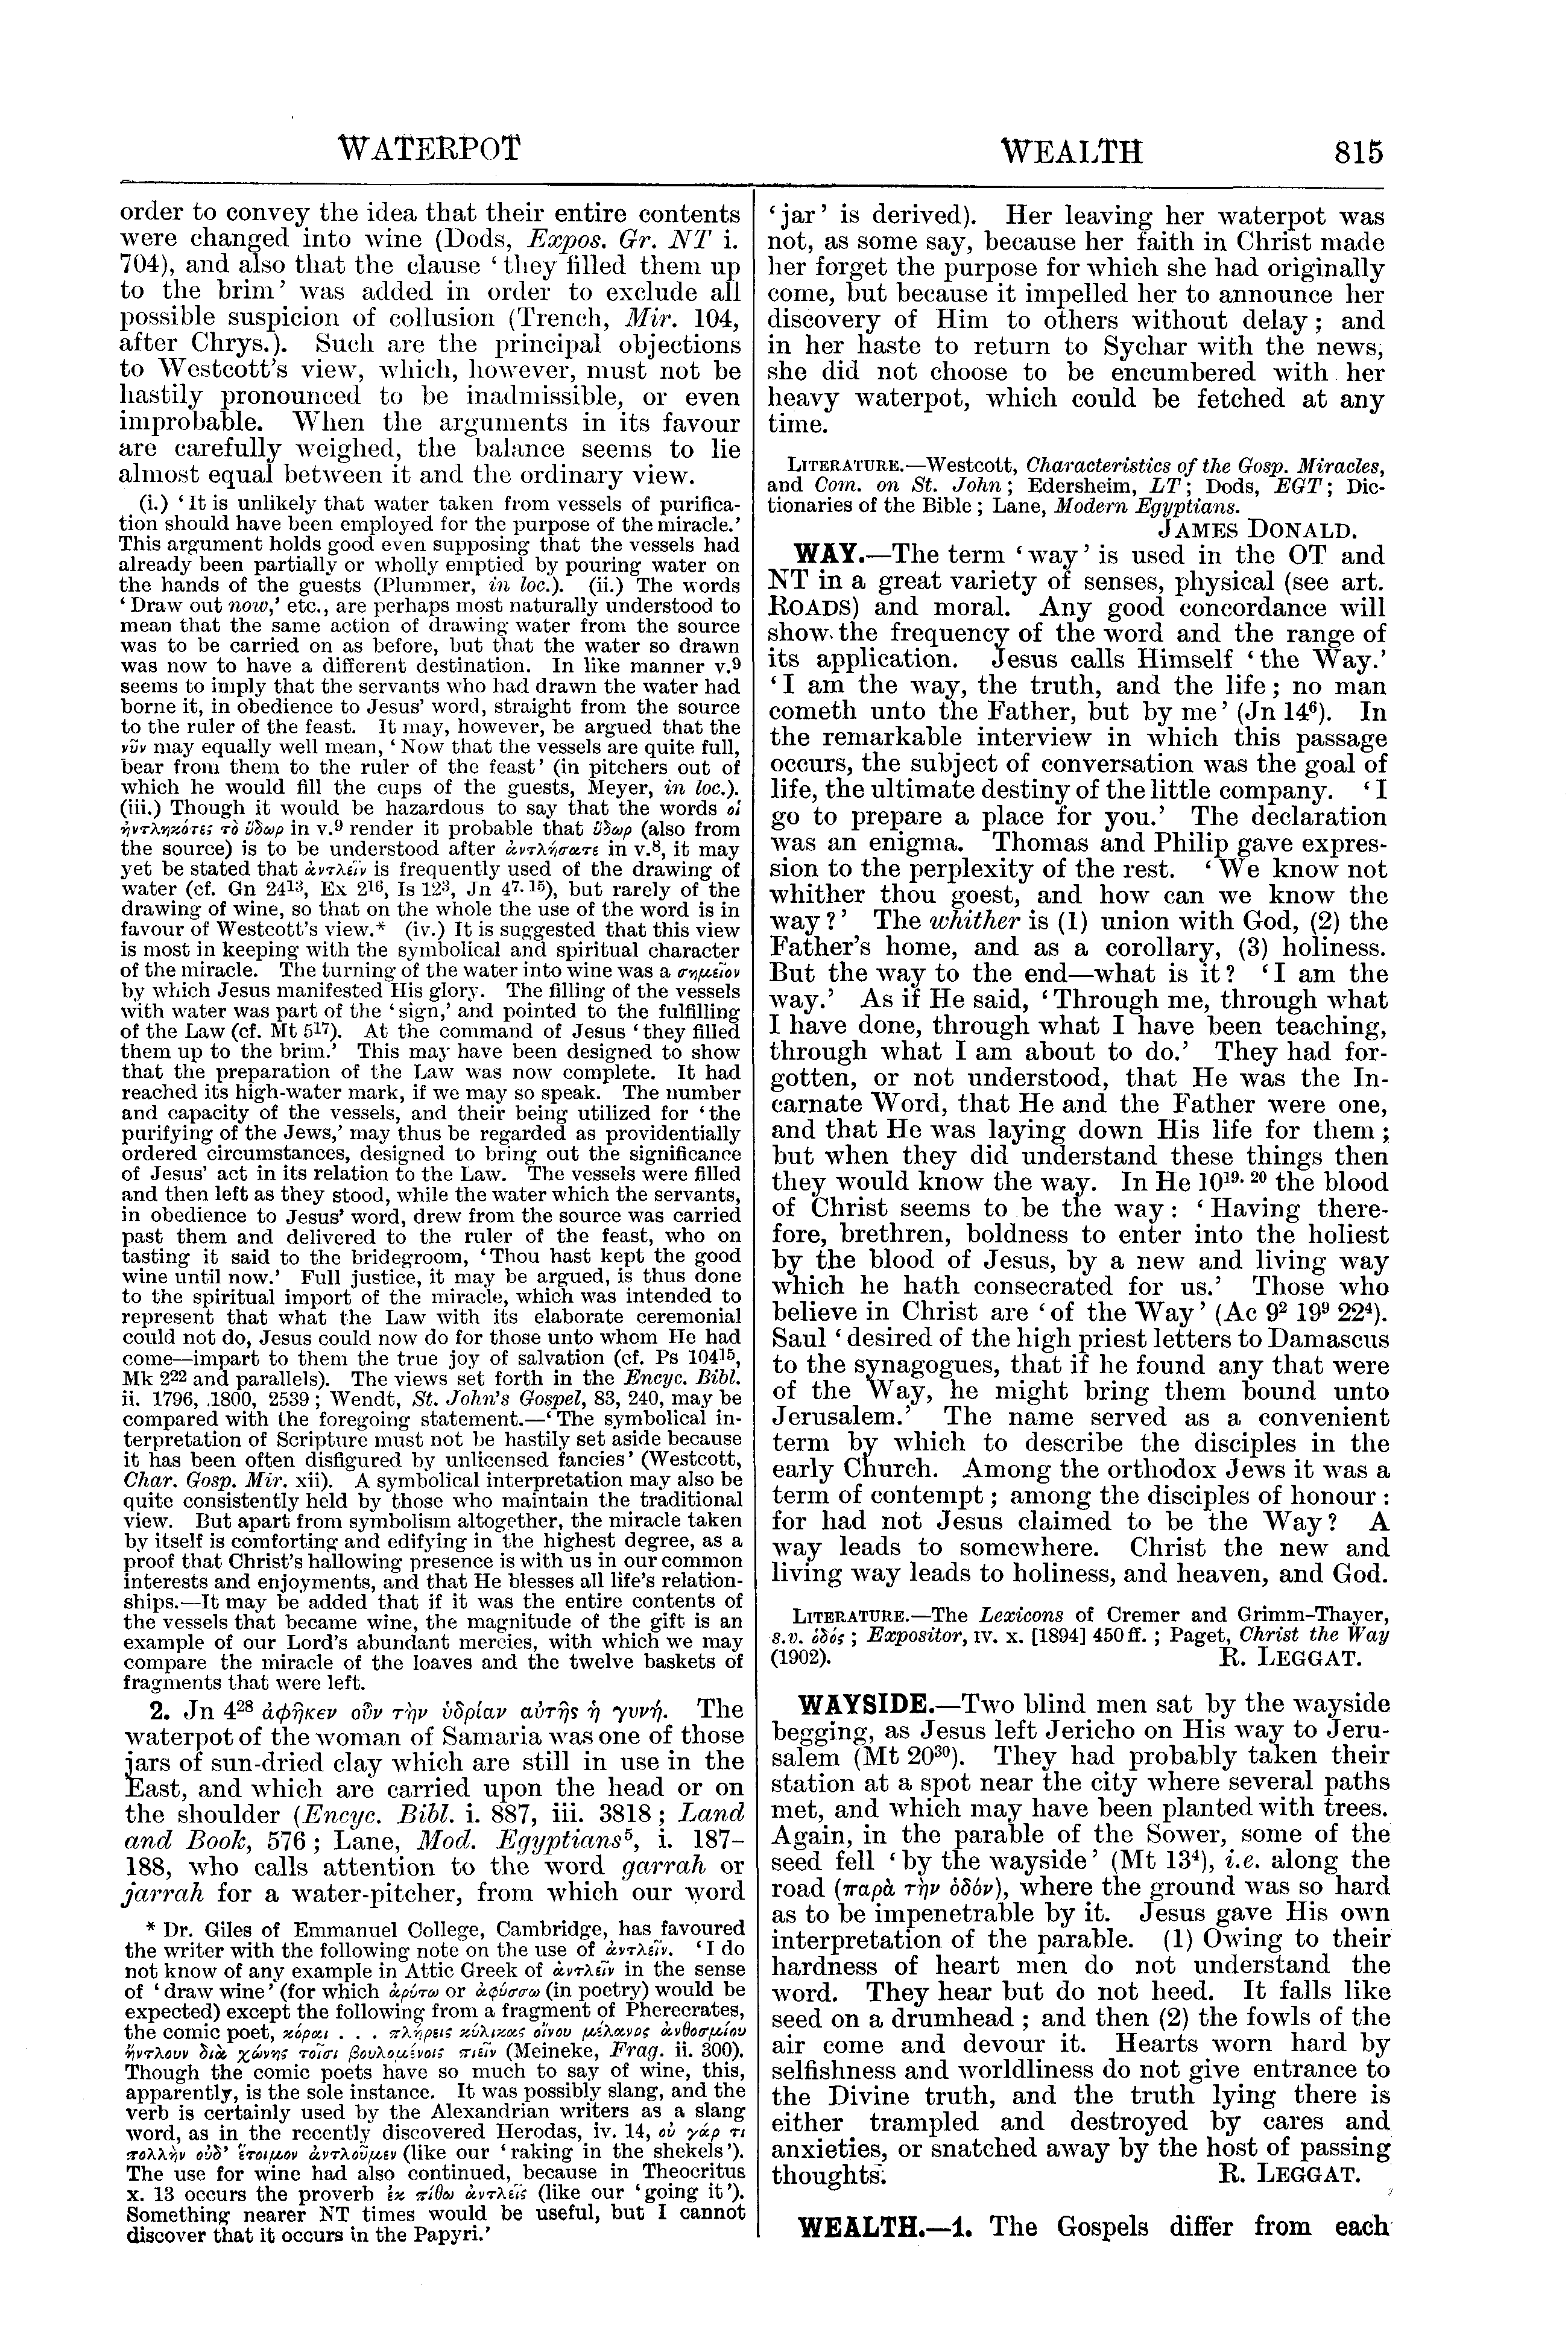 Image of page 815